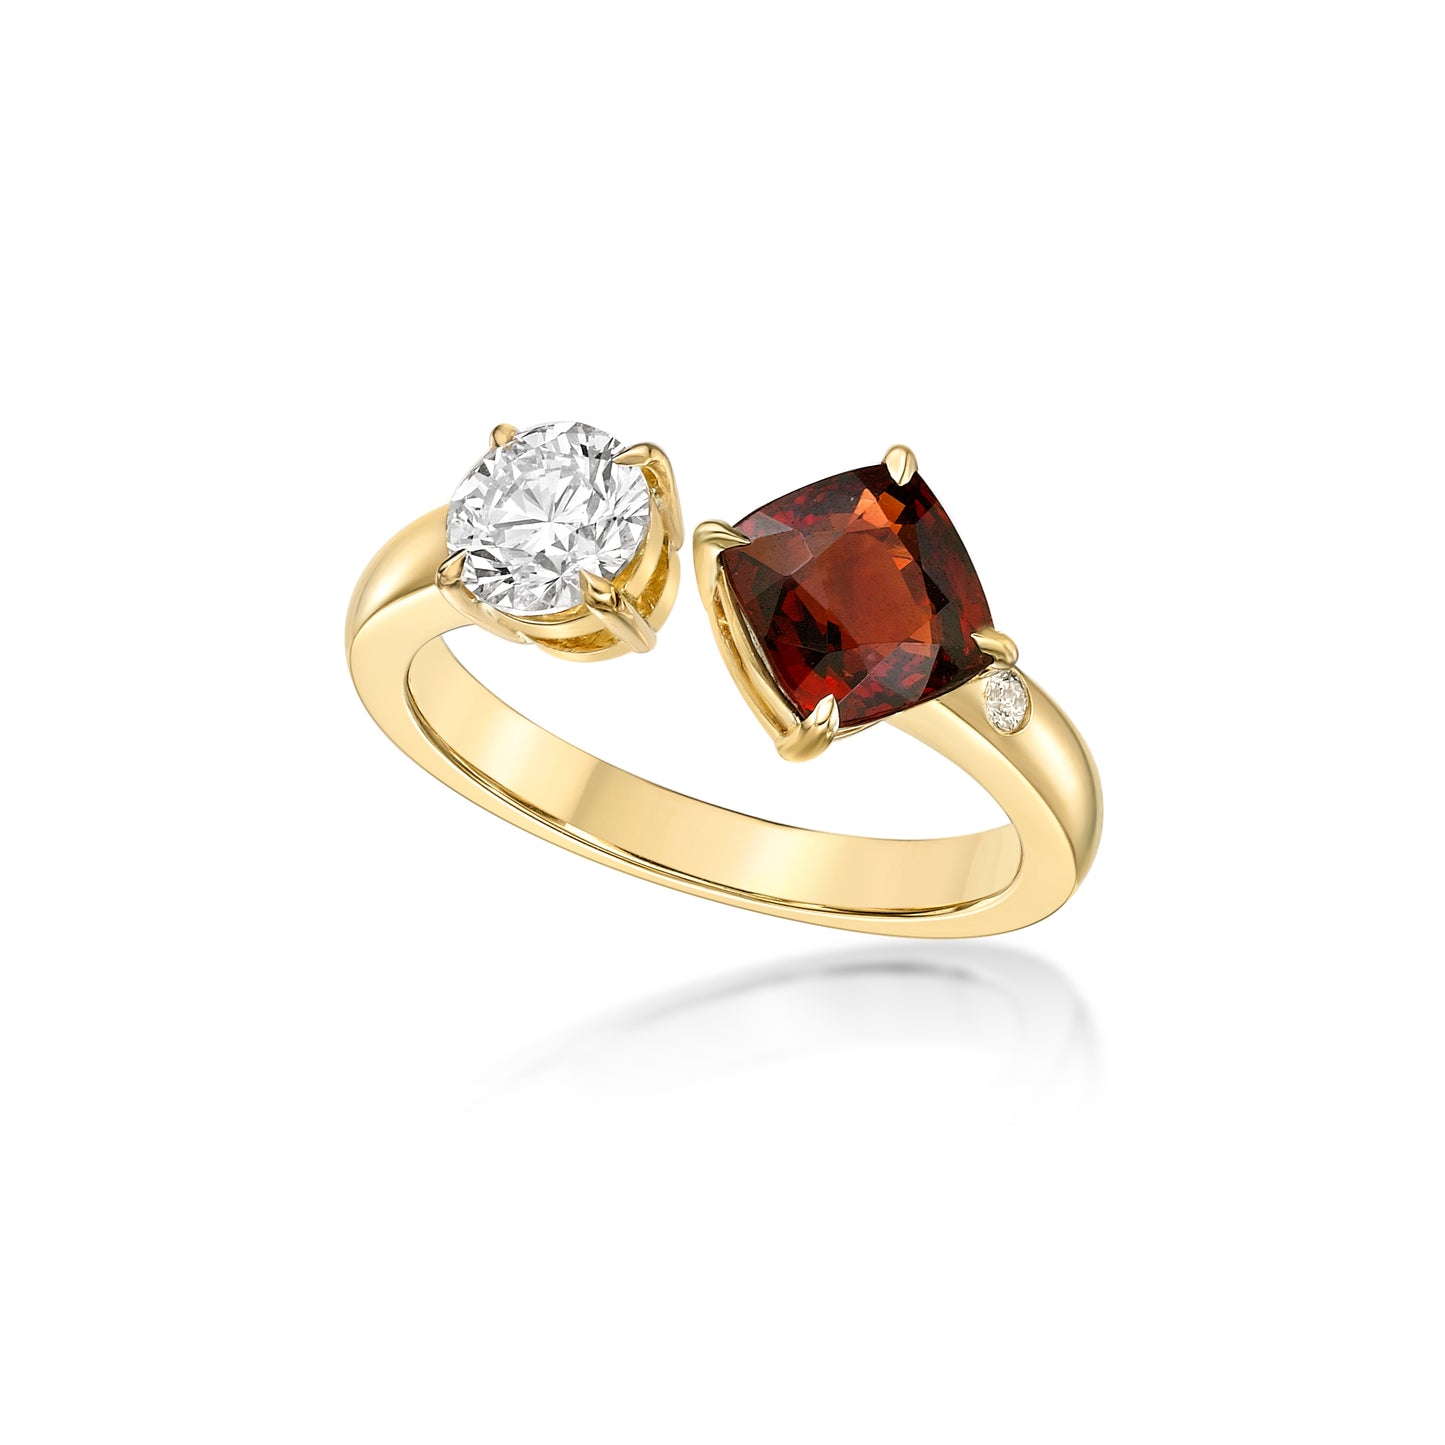 Bespoke handmade 18K Yellow Gold mixed-shape two stone Ring with a Round Brilliant diamond and Cushion Red Garnet